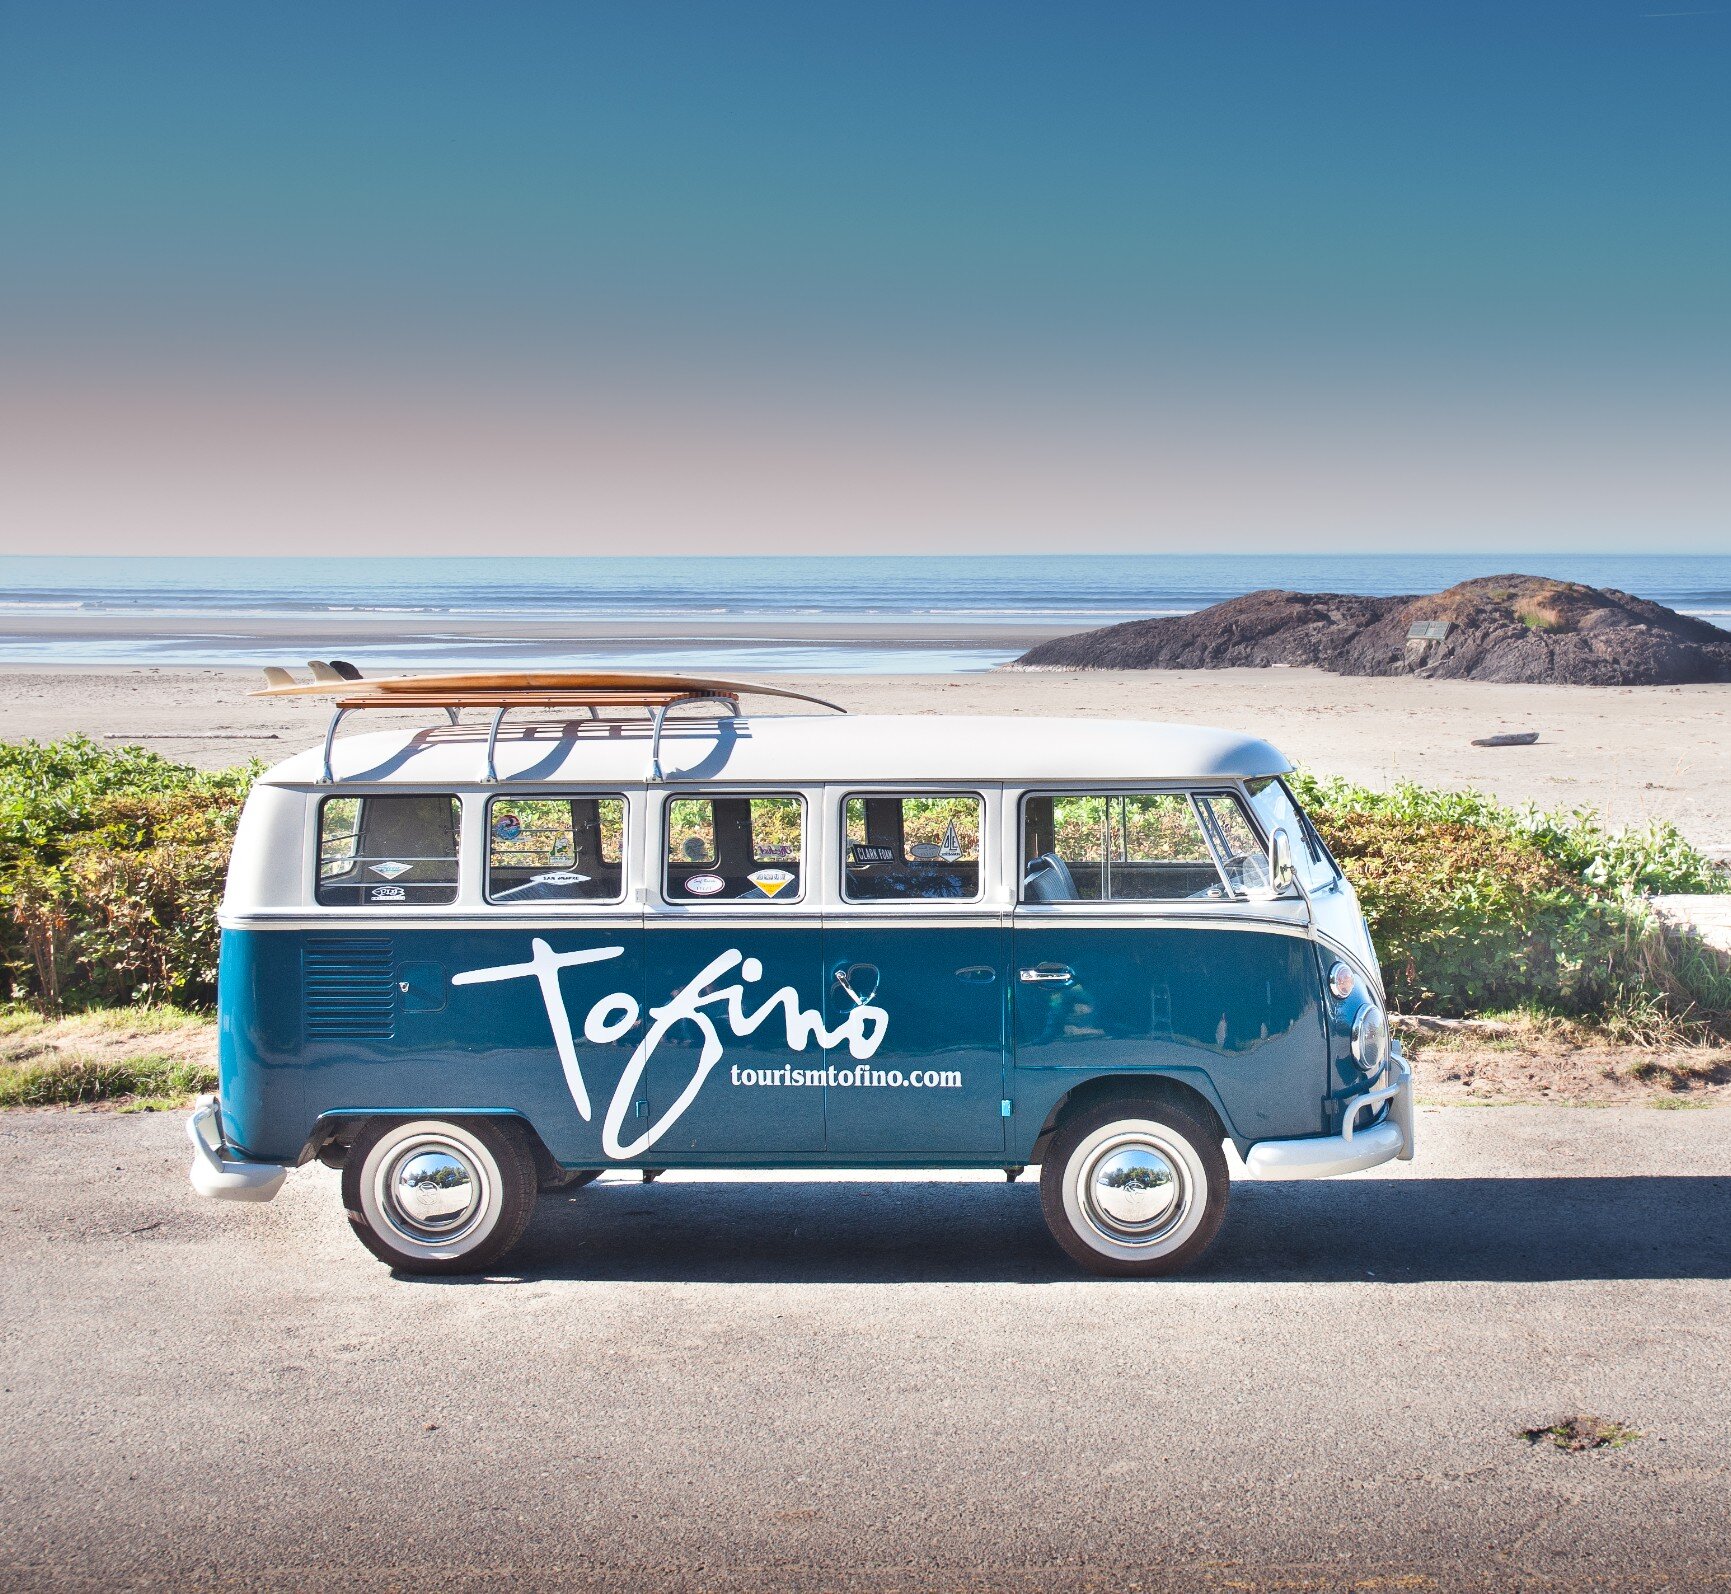 Tourism Tofino's VW van parked by the beach